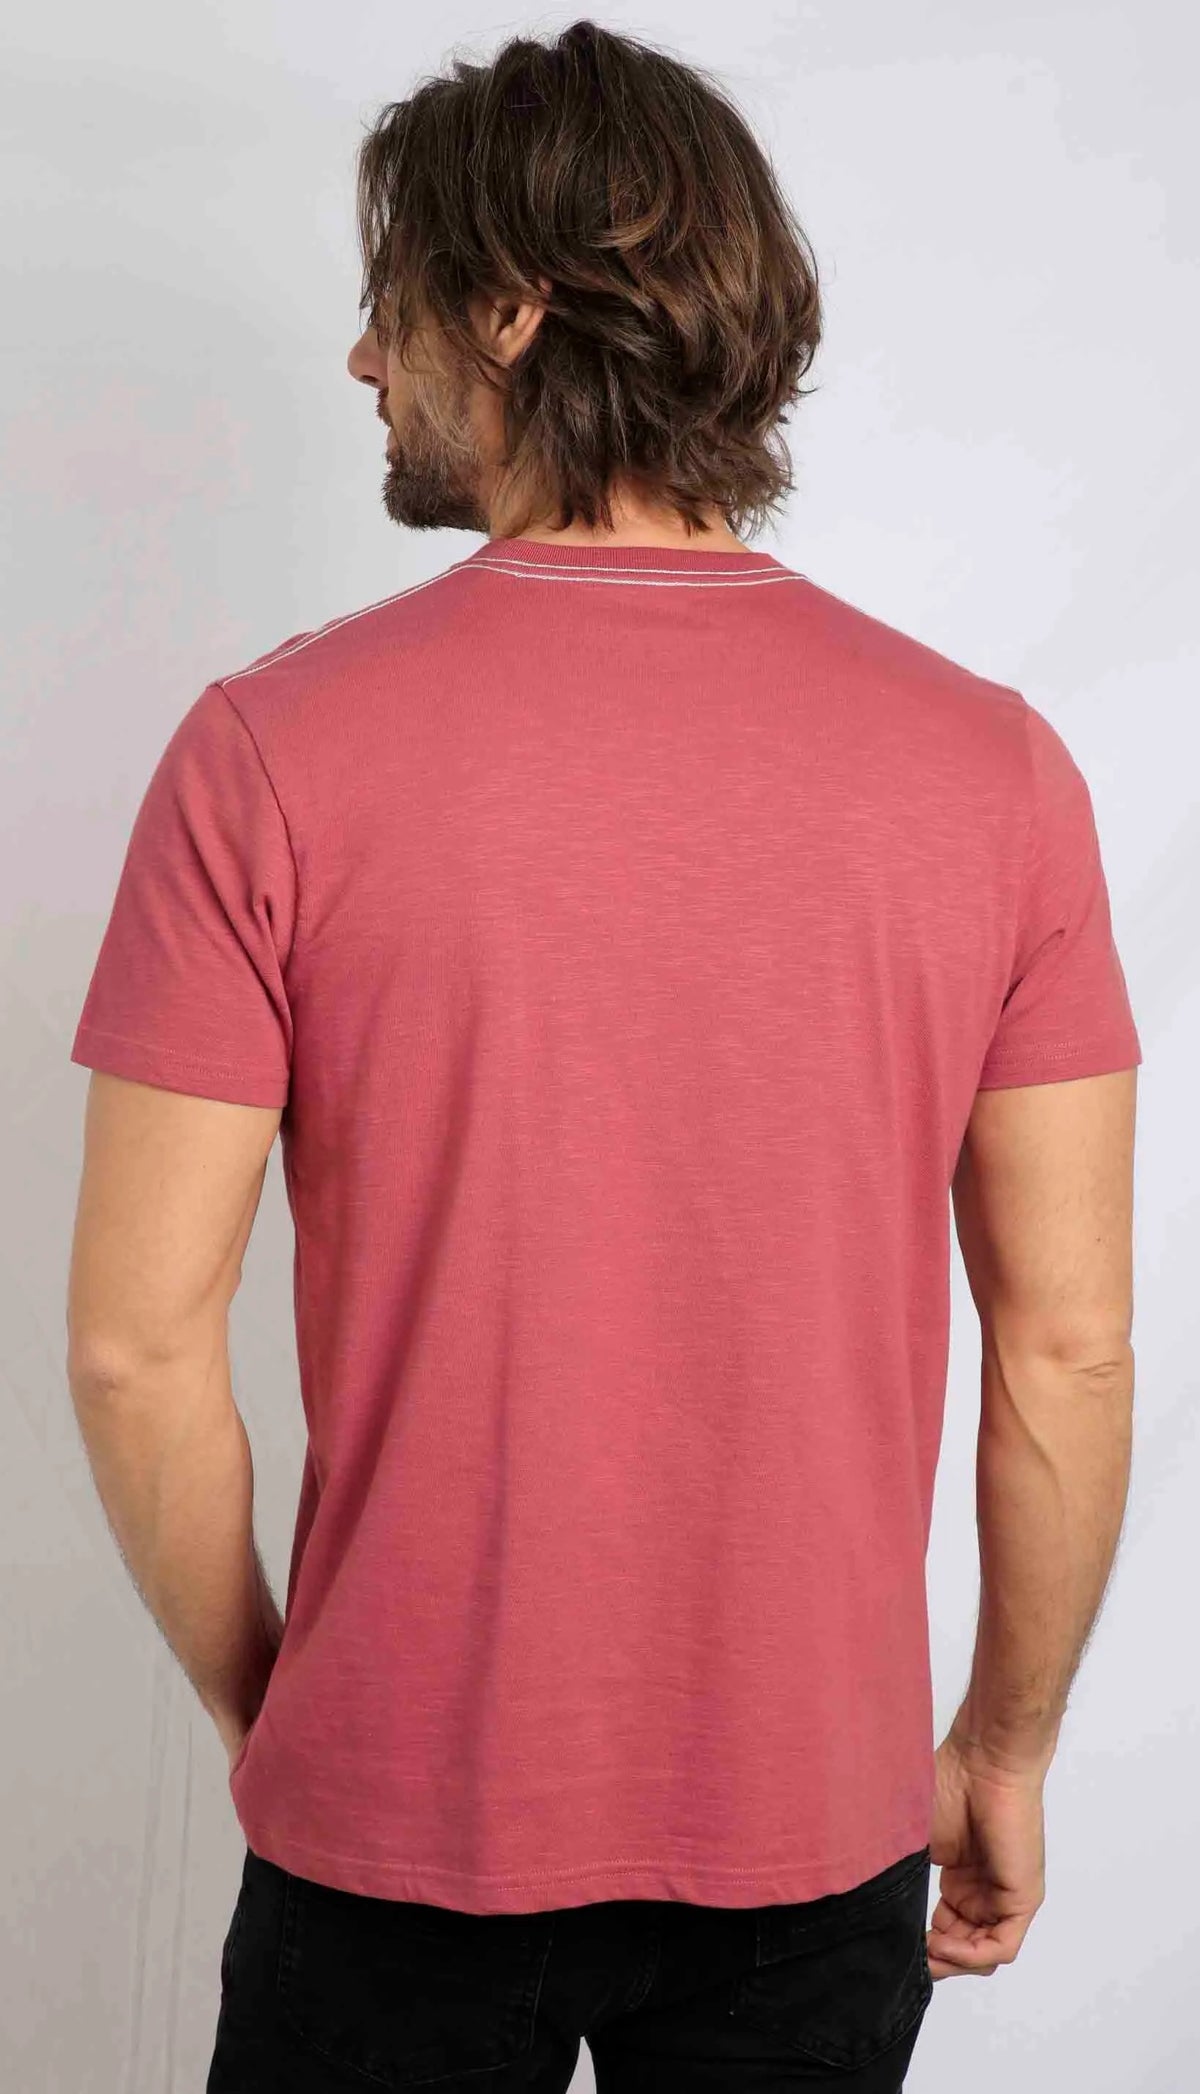 Men's plain short sleeve, crew neck Fished tee from Weird Fish in Rosewood.